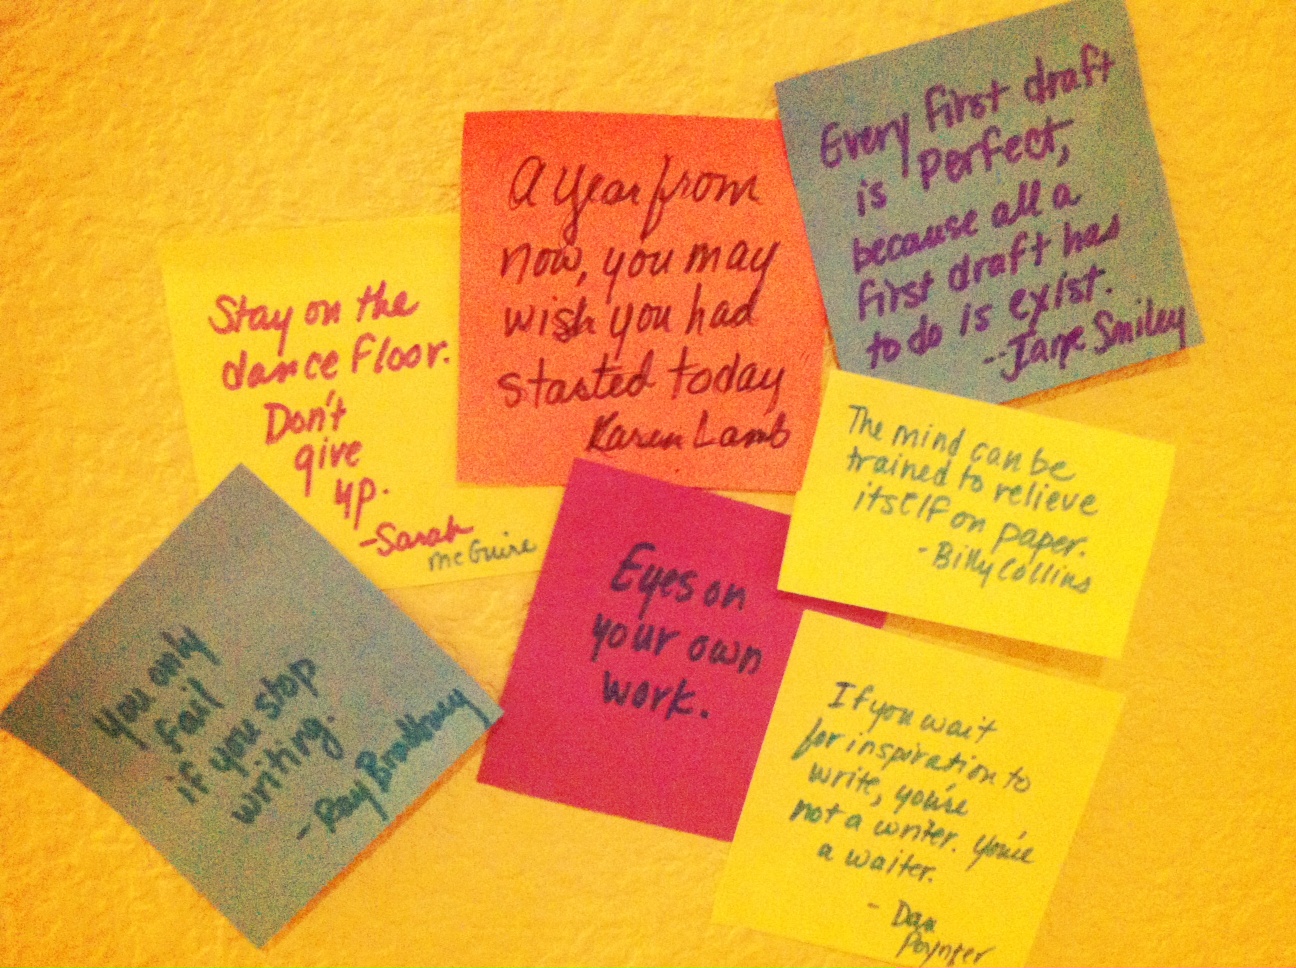 Sticky Notes and Bible Quotes